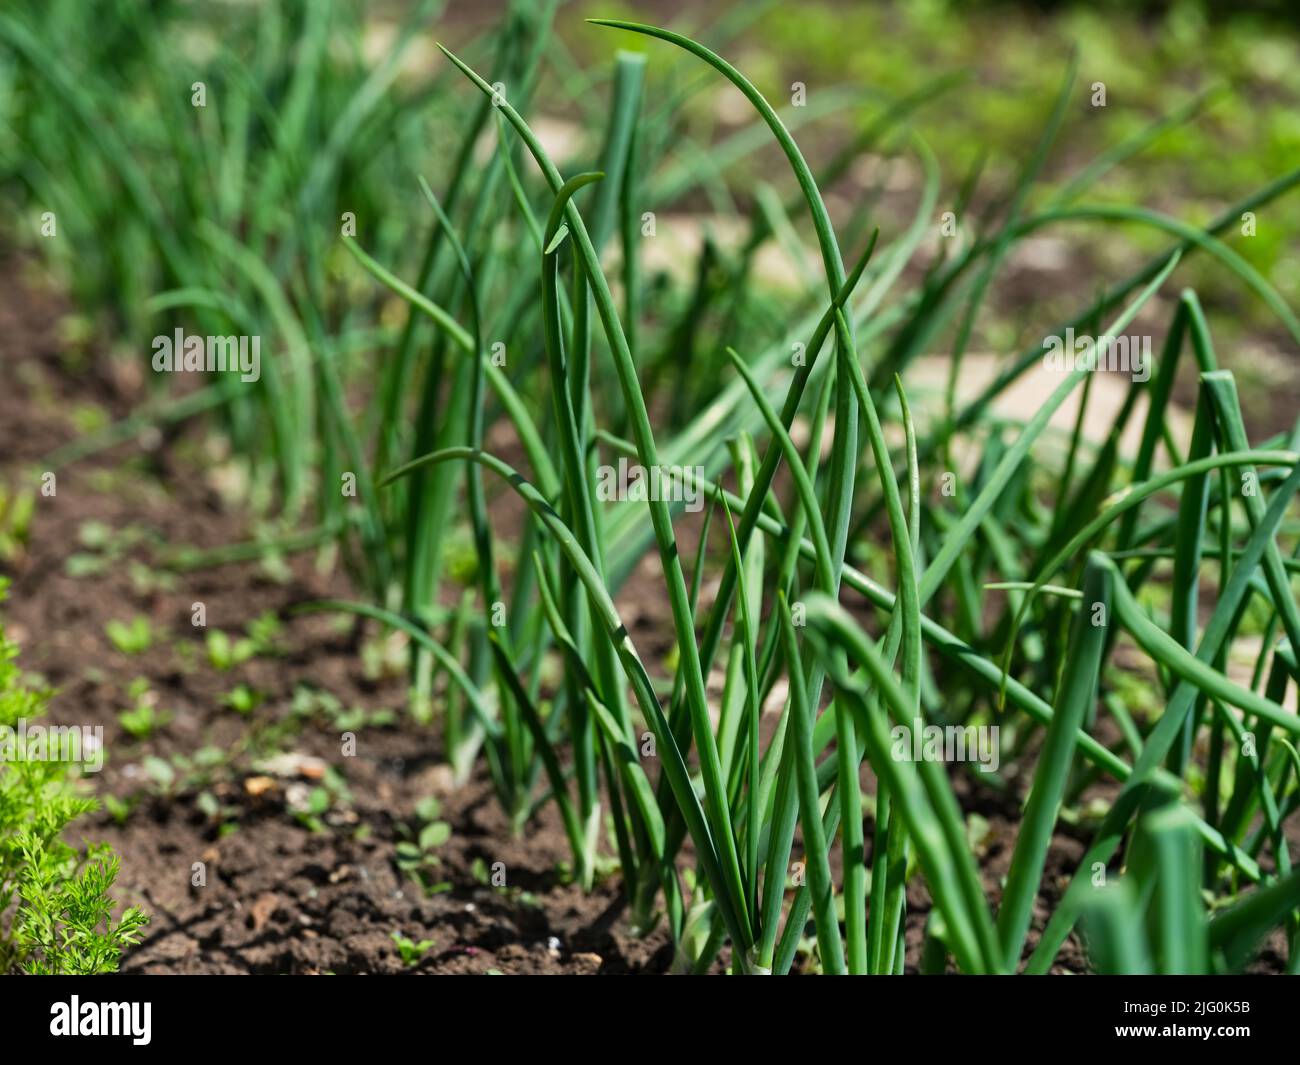 Green onions growing on a garden bed in a vegetable garden. Stock Photo